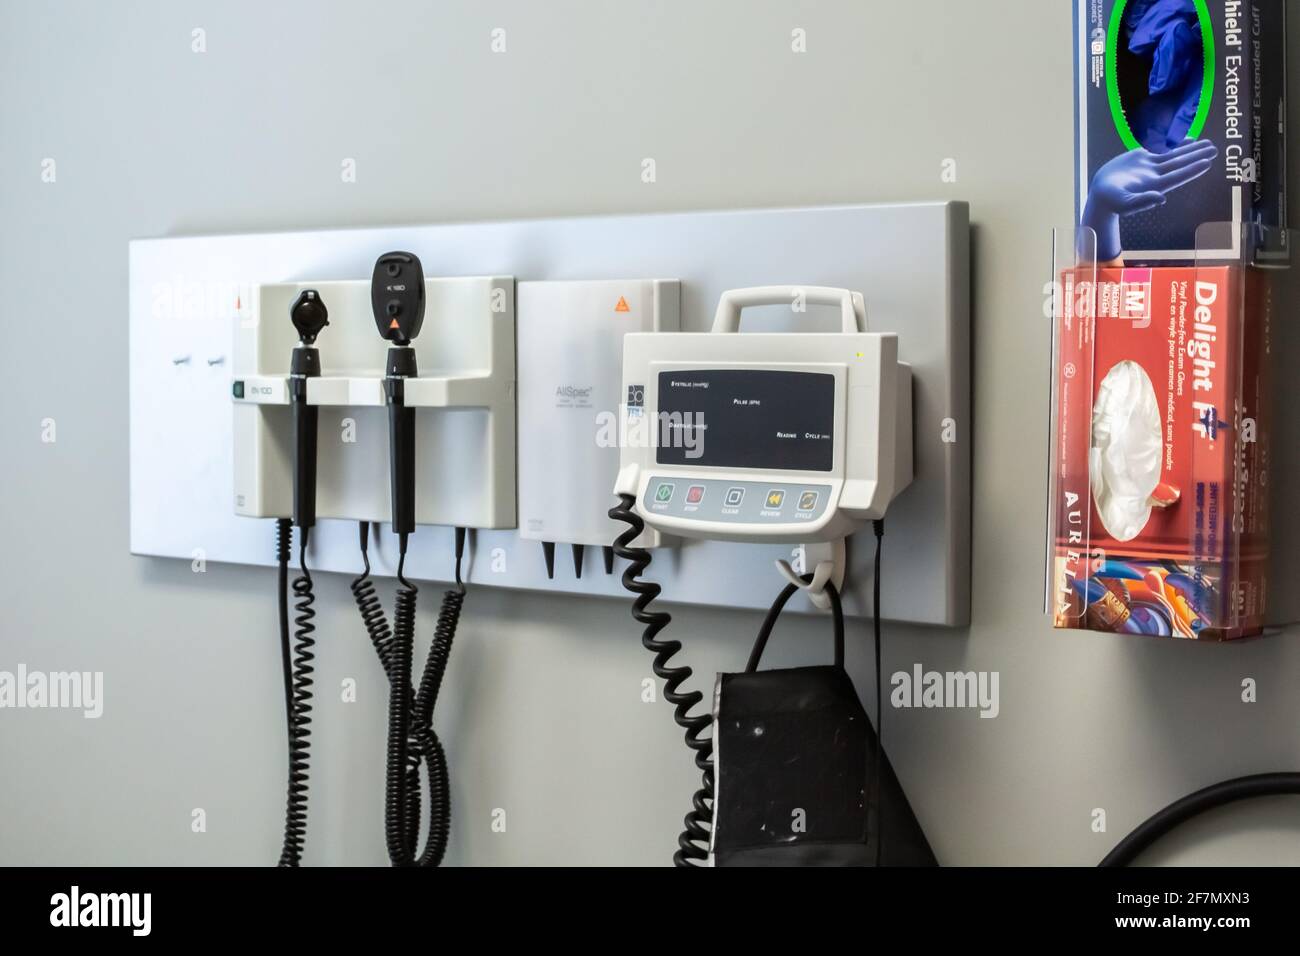 London, Ontario, Canada - February 26 2021 - Closeup of a hanging blood pressure monitor and a box of surgical gloves in a small family clinic. Stock Photo